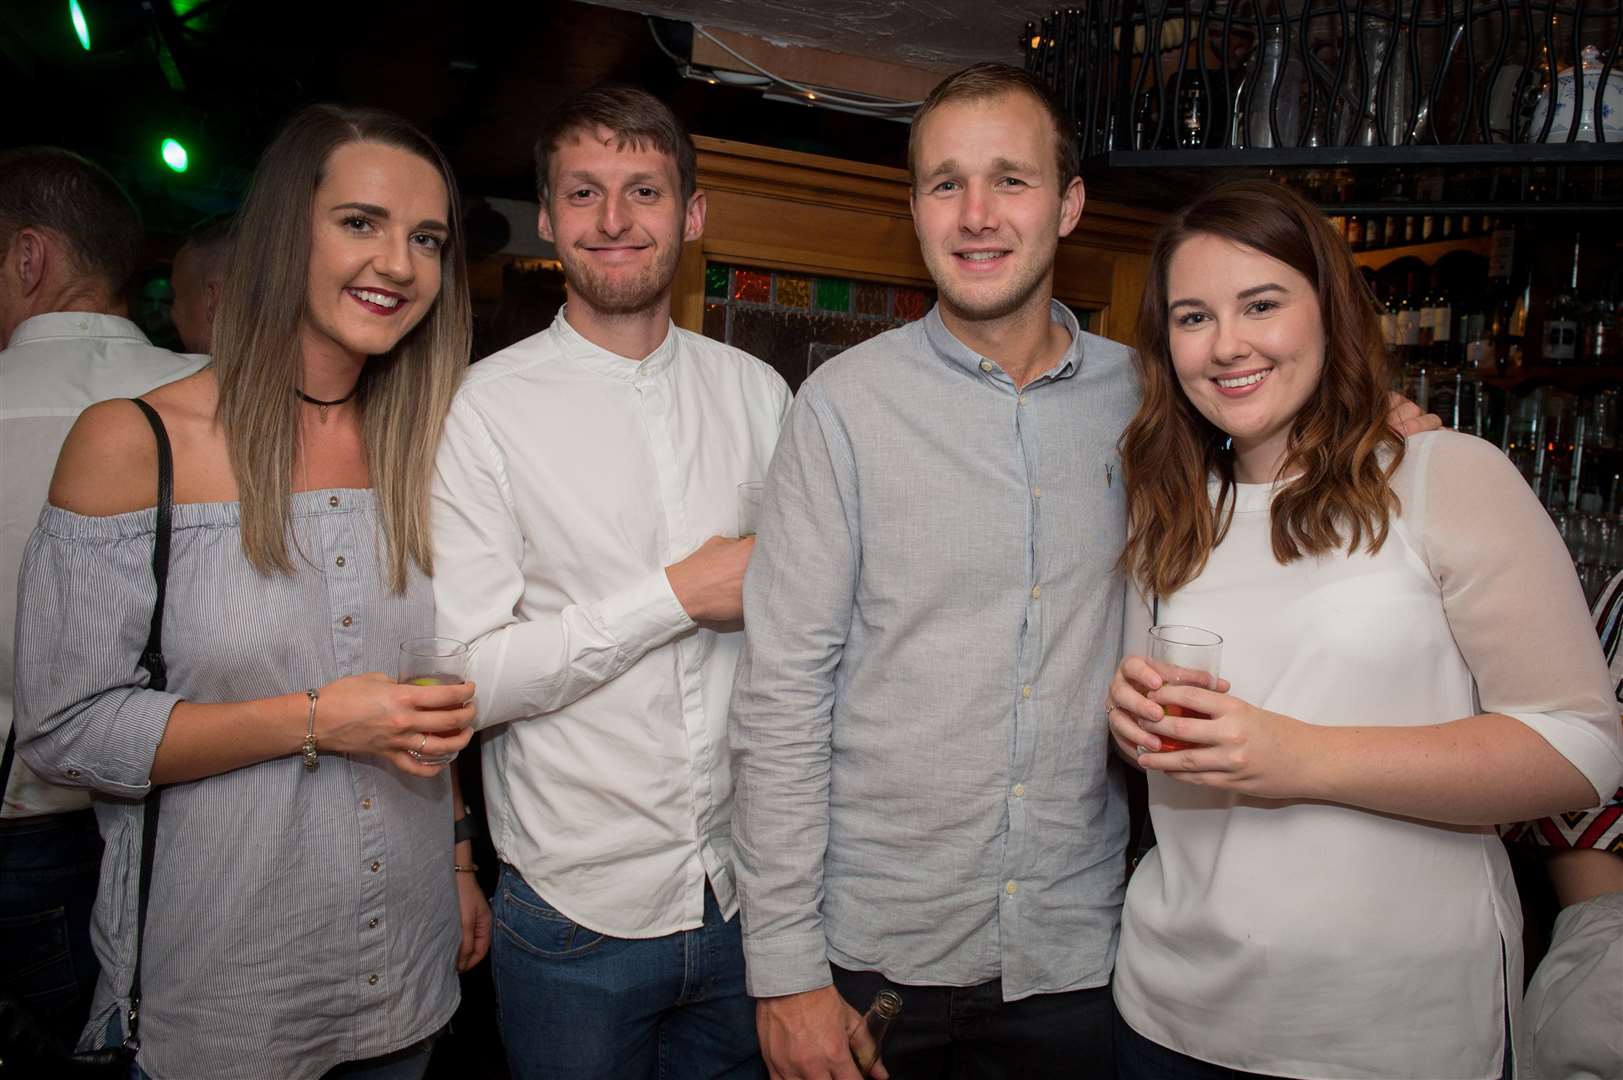 Night out for friends (left to right) Rae Wilson, Johnny Gott, Gavin Reid and Jodie Reid.